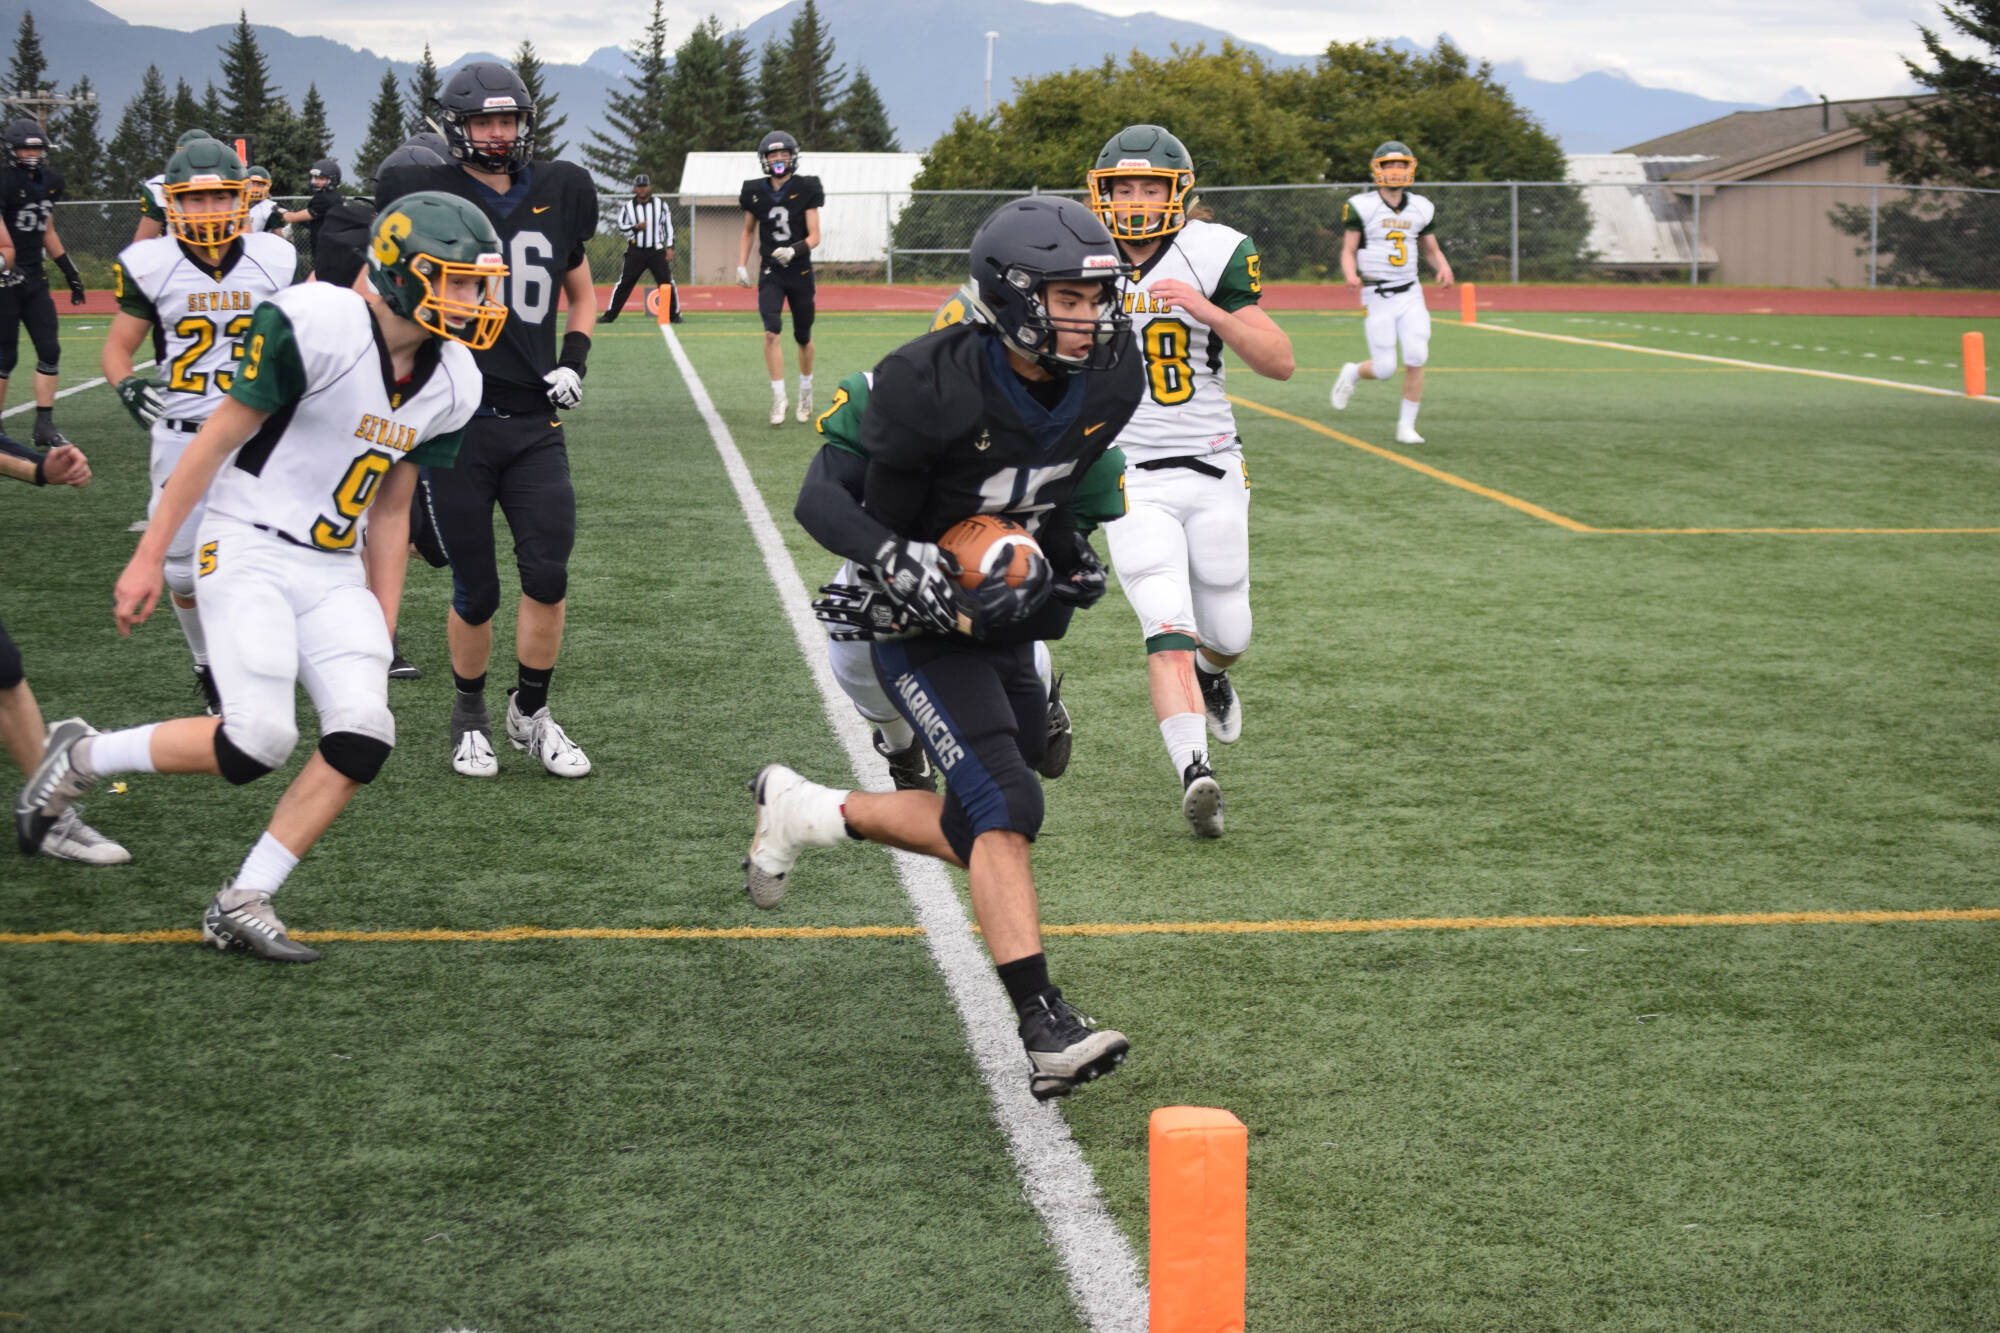 Senior Russell Nyball rushes to score a decisive touchdown on Friday, Aug. 26 at Homer High School Field in Homer, Alaska. (Photo by Charlie Menke/Homer News)